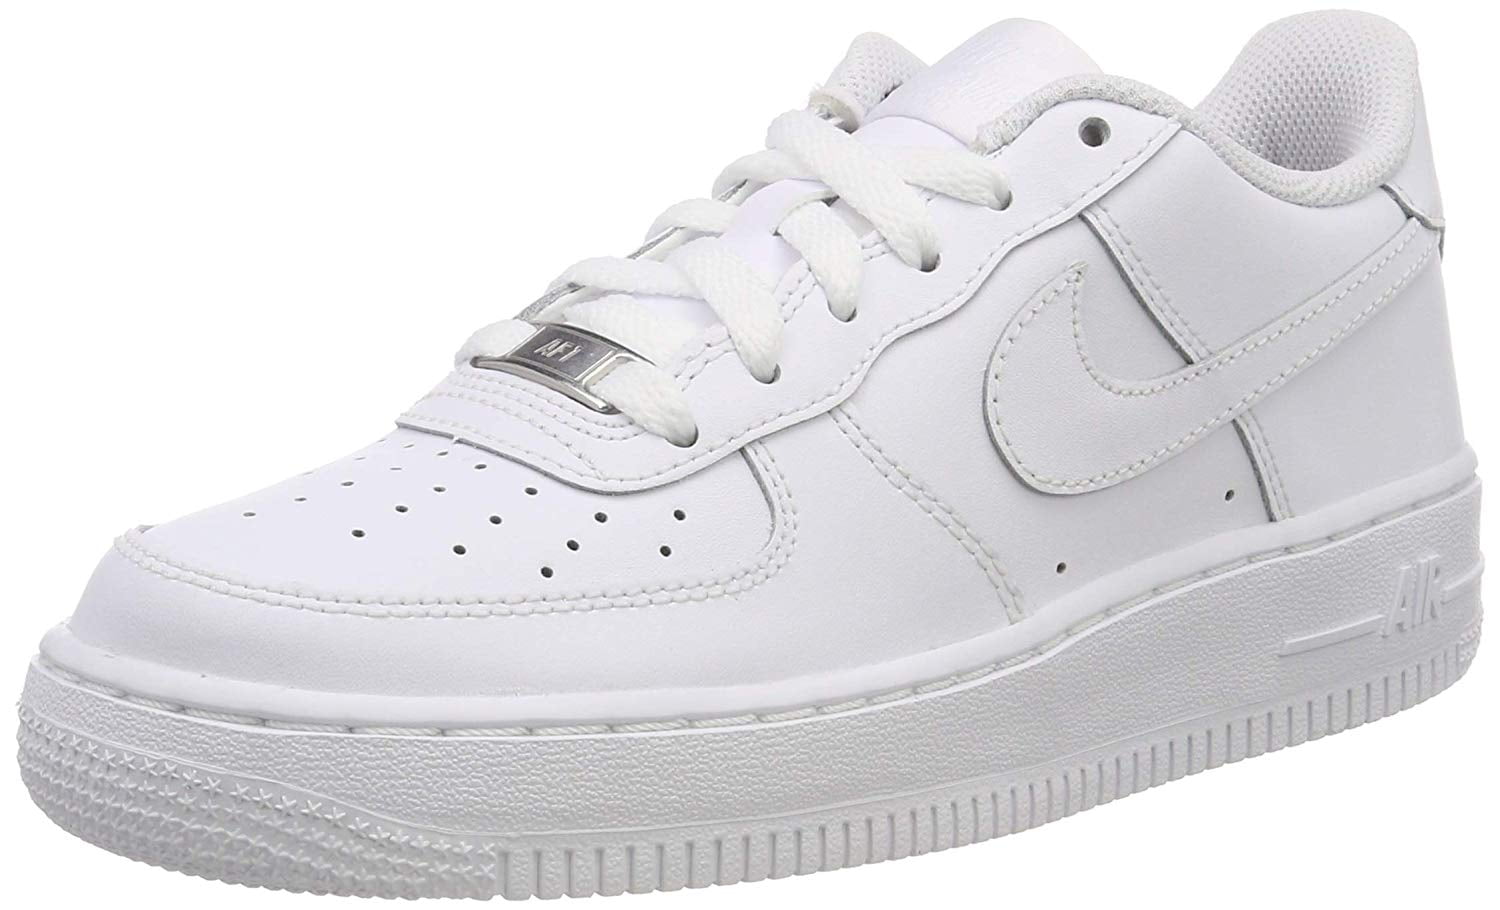 Nike Air Force 1 - AF1 '82 White YOUTH Size 5Y 314192-106 Leather  Sneakers Shoes